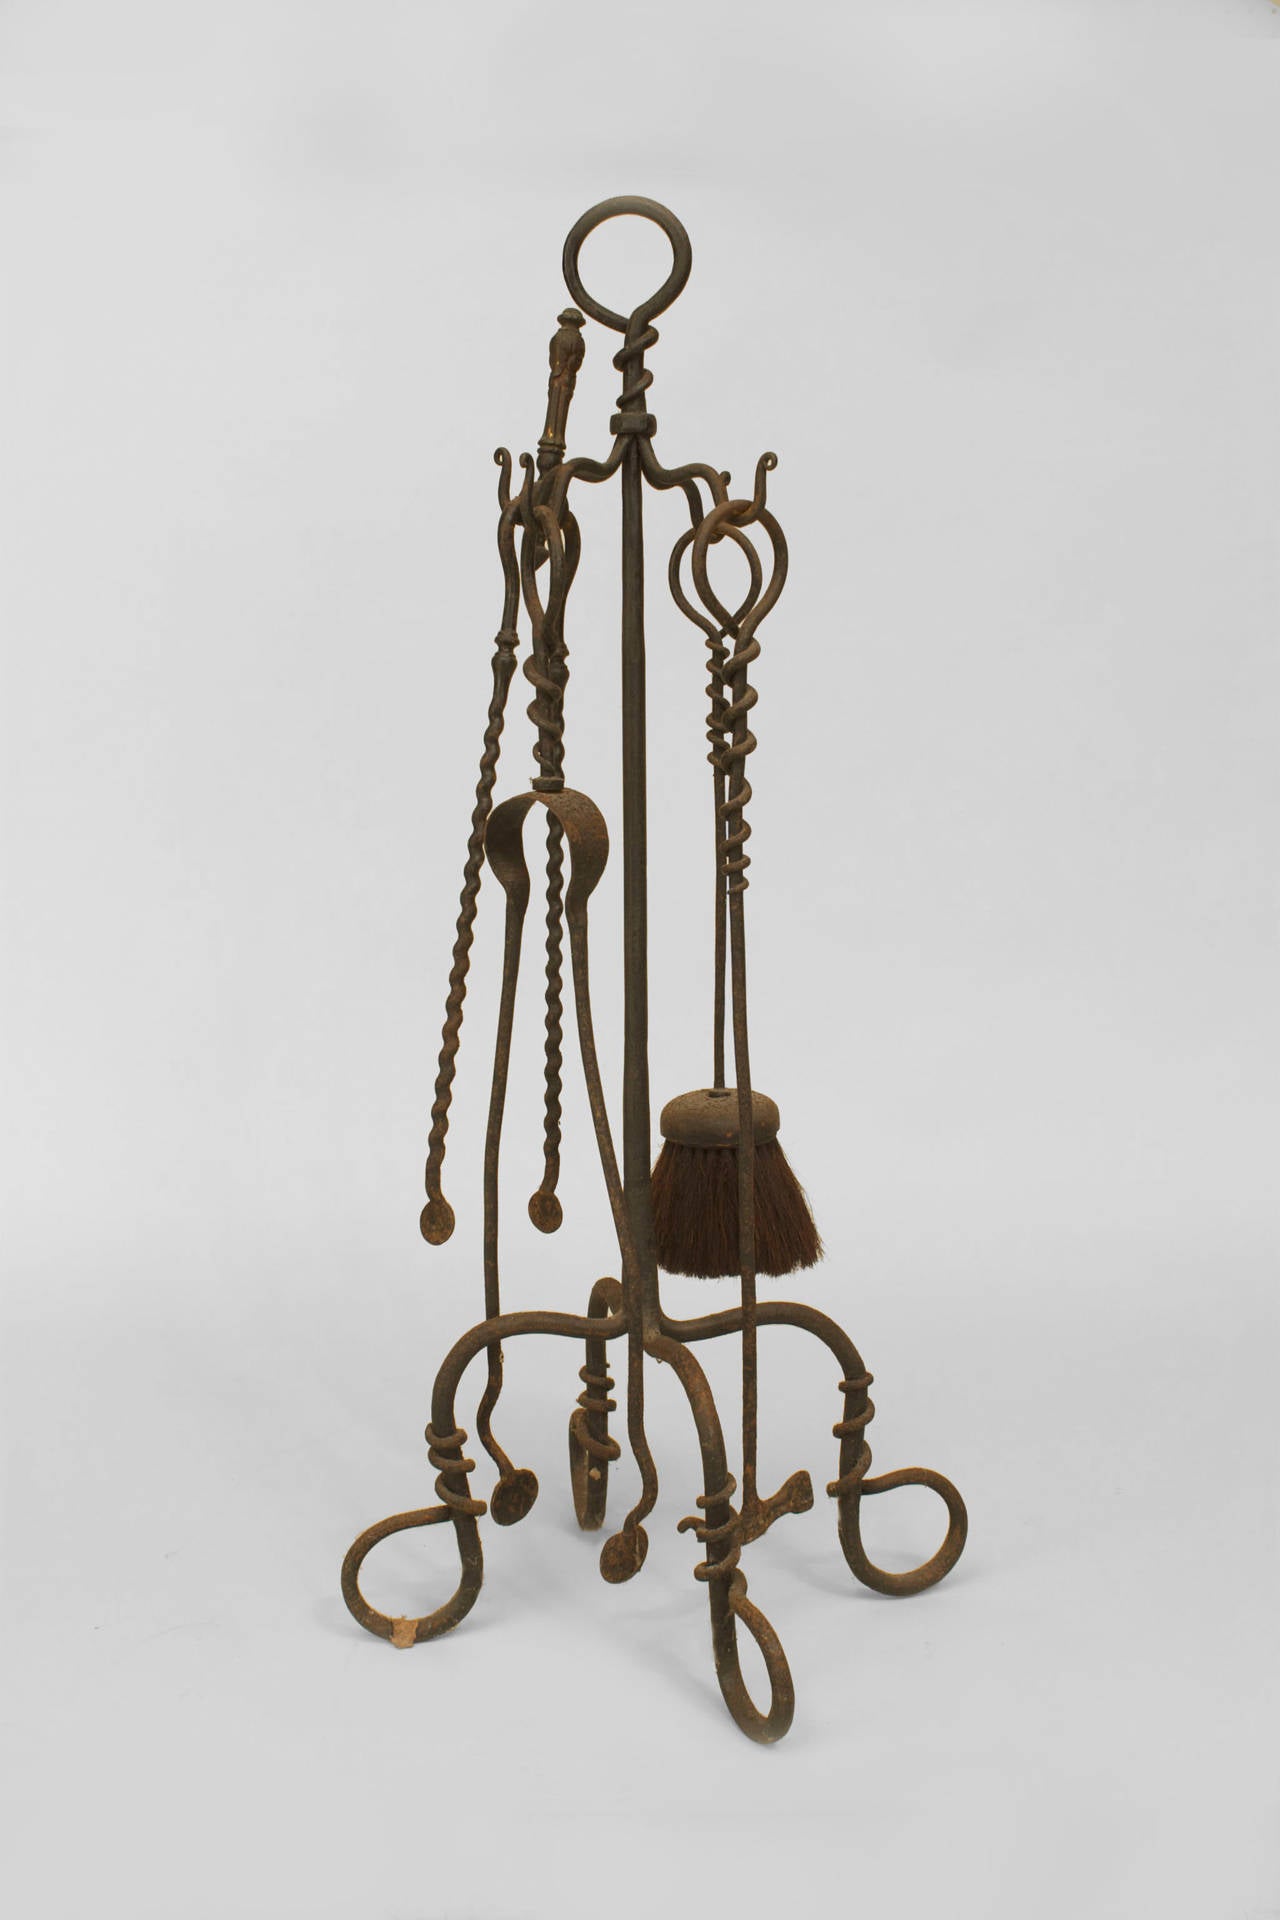 Set of 4 American Mission-style (Early 20th Century) wrought iron fire tools on a stand with 4 scroll base feet and ring top.
